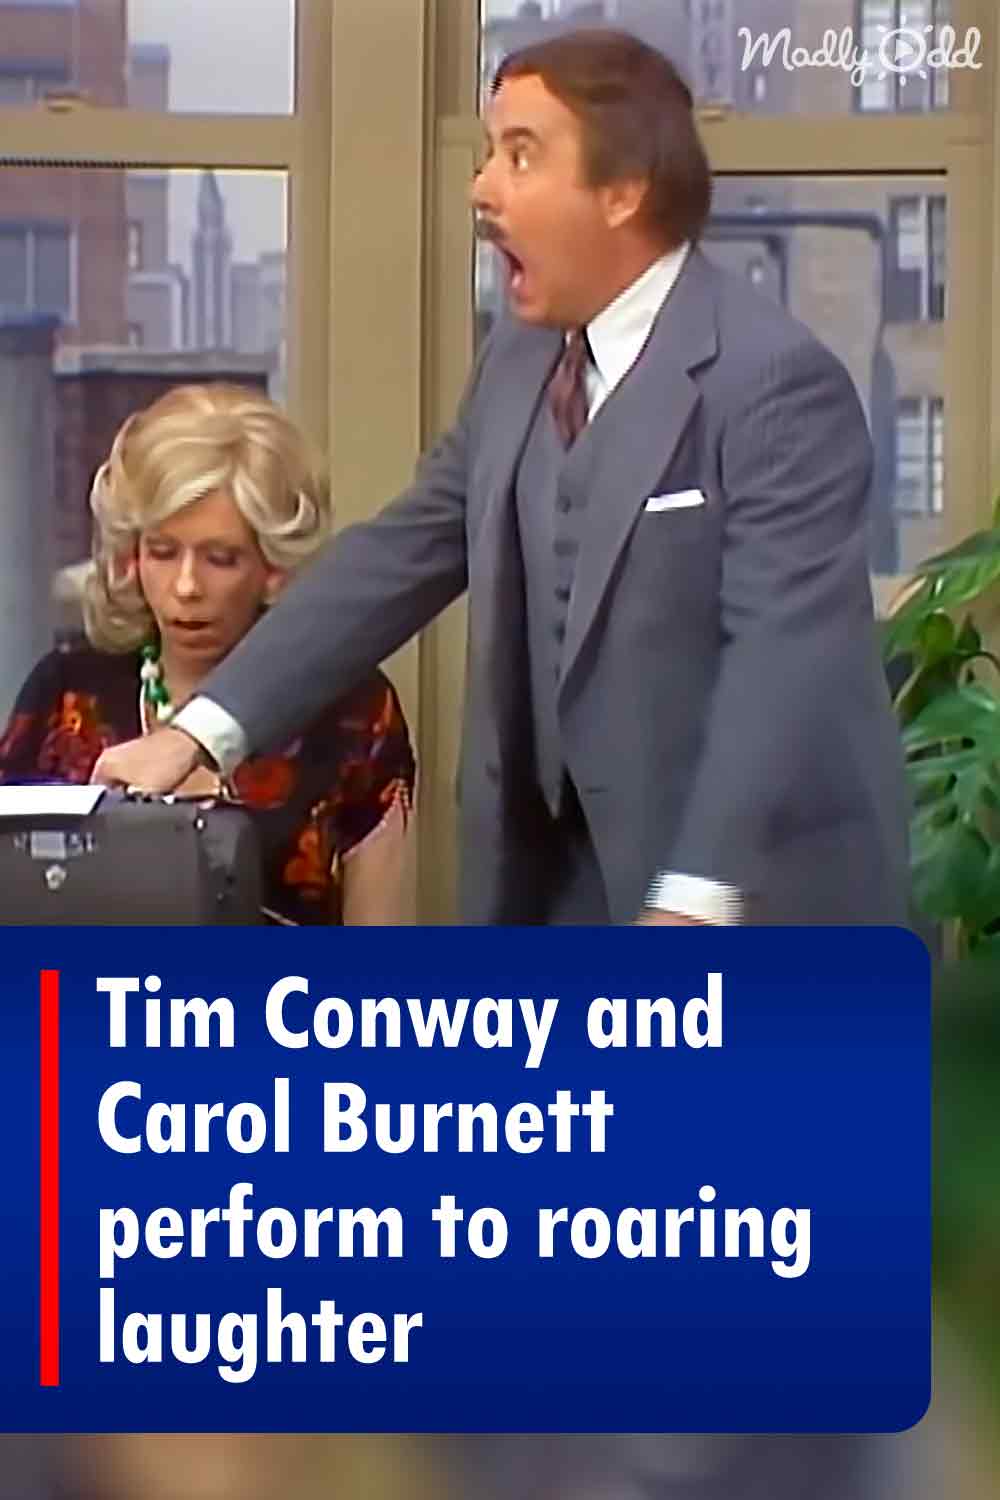 Tim Conway and Carol Burnett perform to roaring laughter